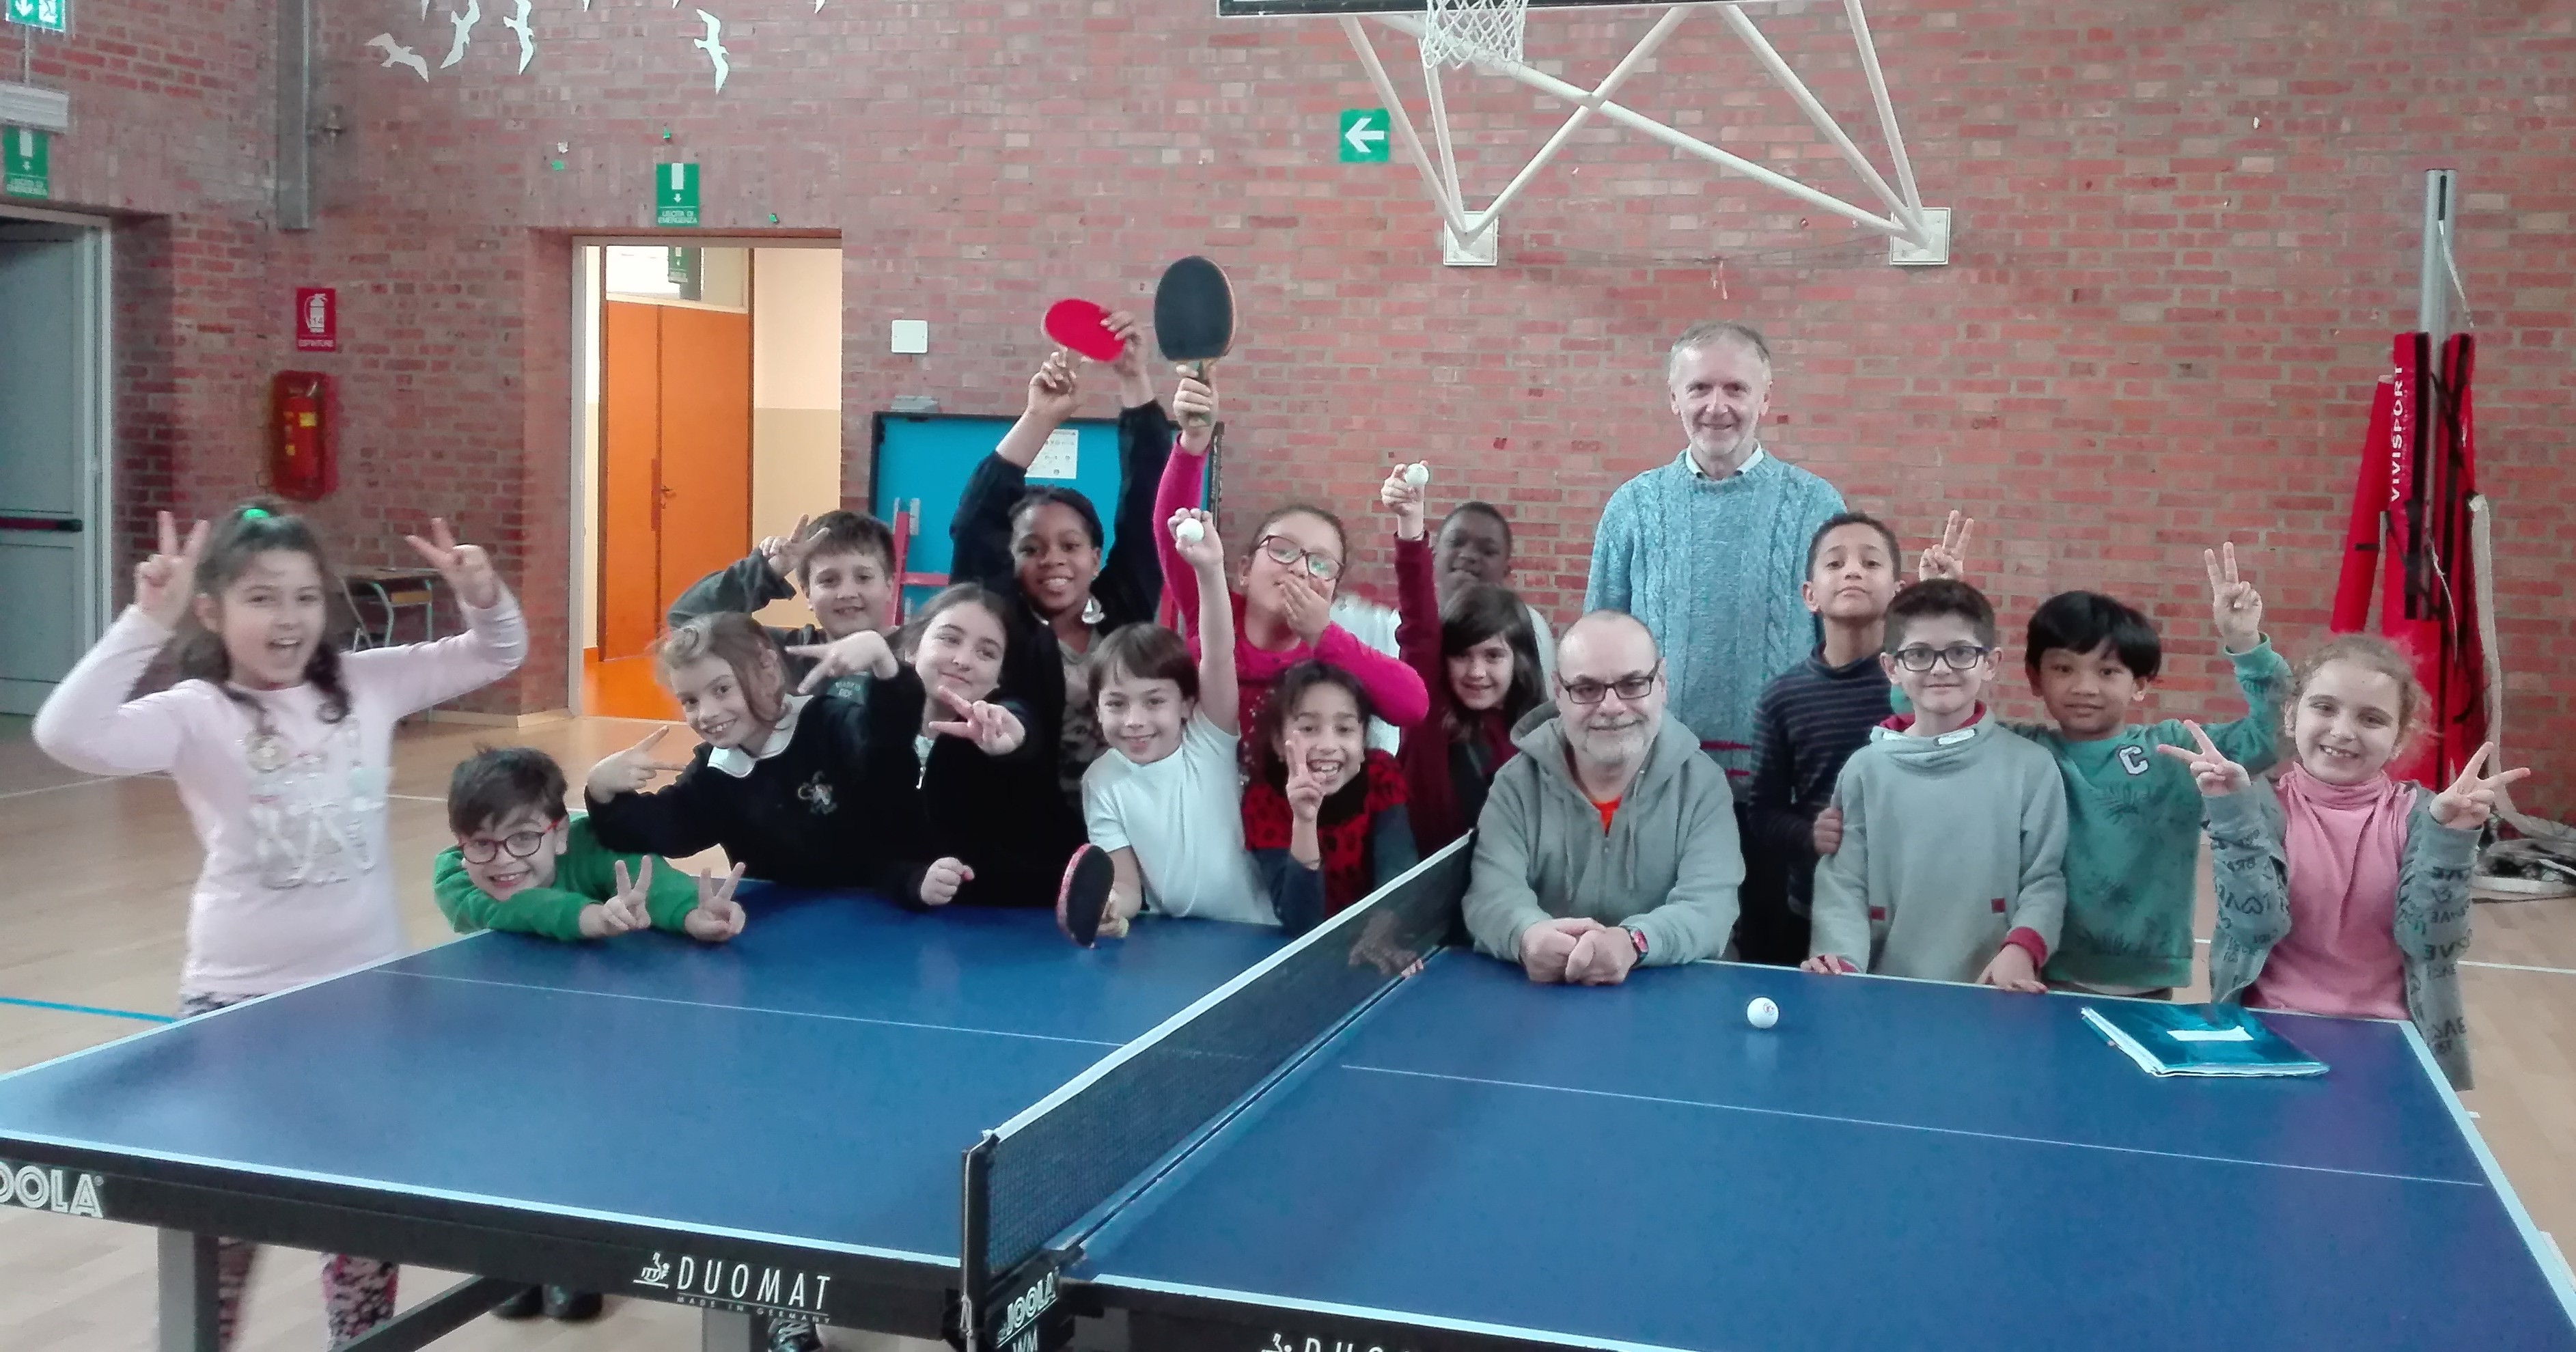 Ping Pong a Udine